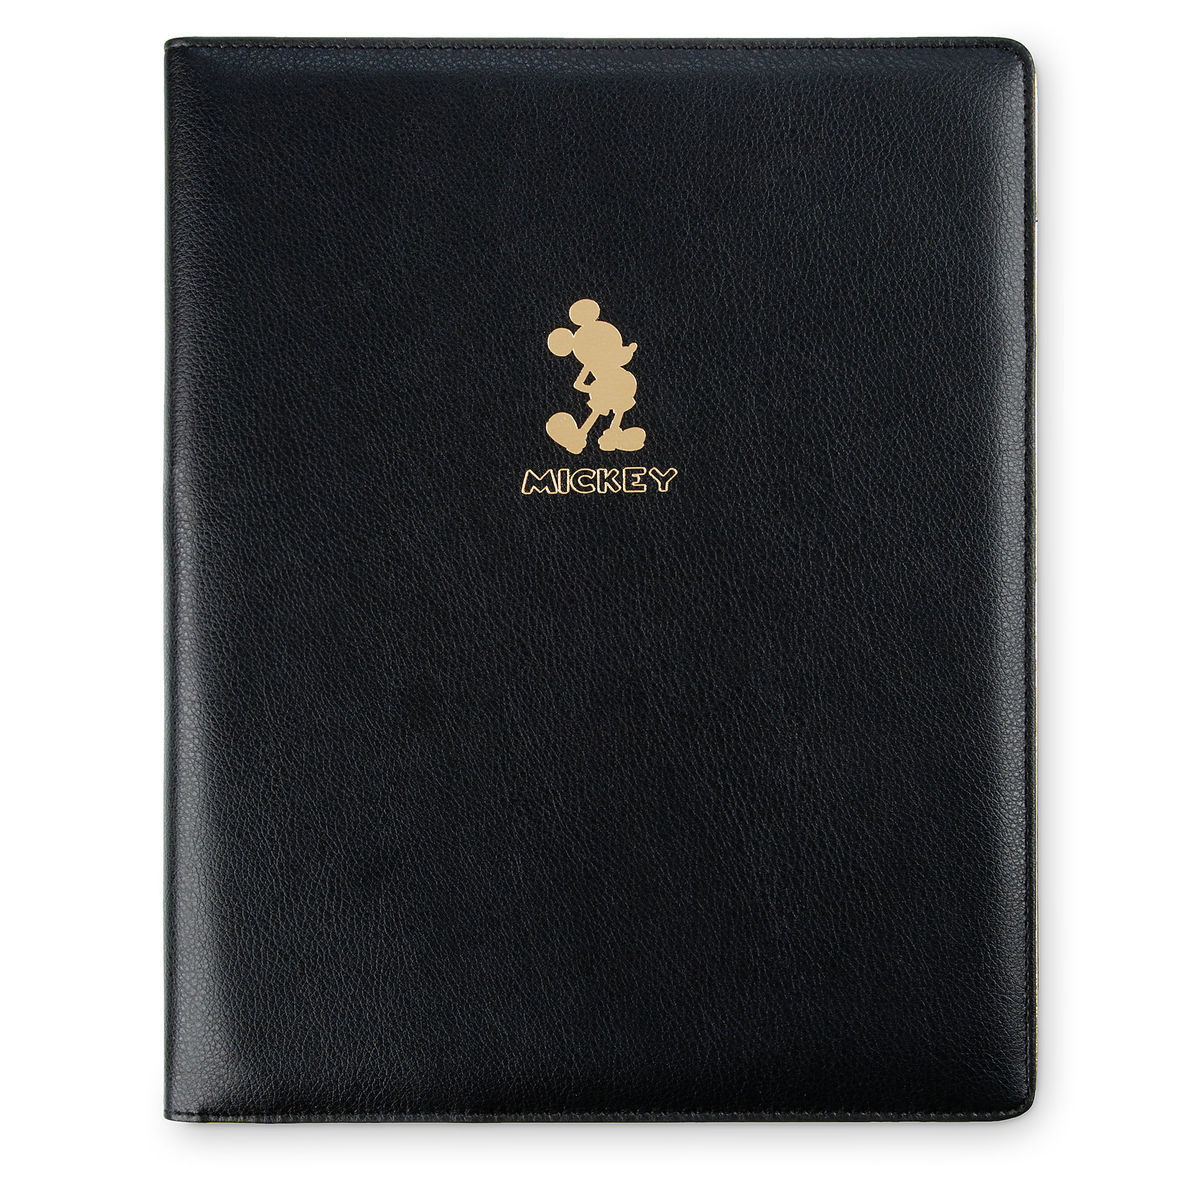 Mickey Mouse Gold Collection Out Now – DisKingdom.com